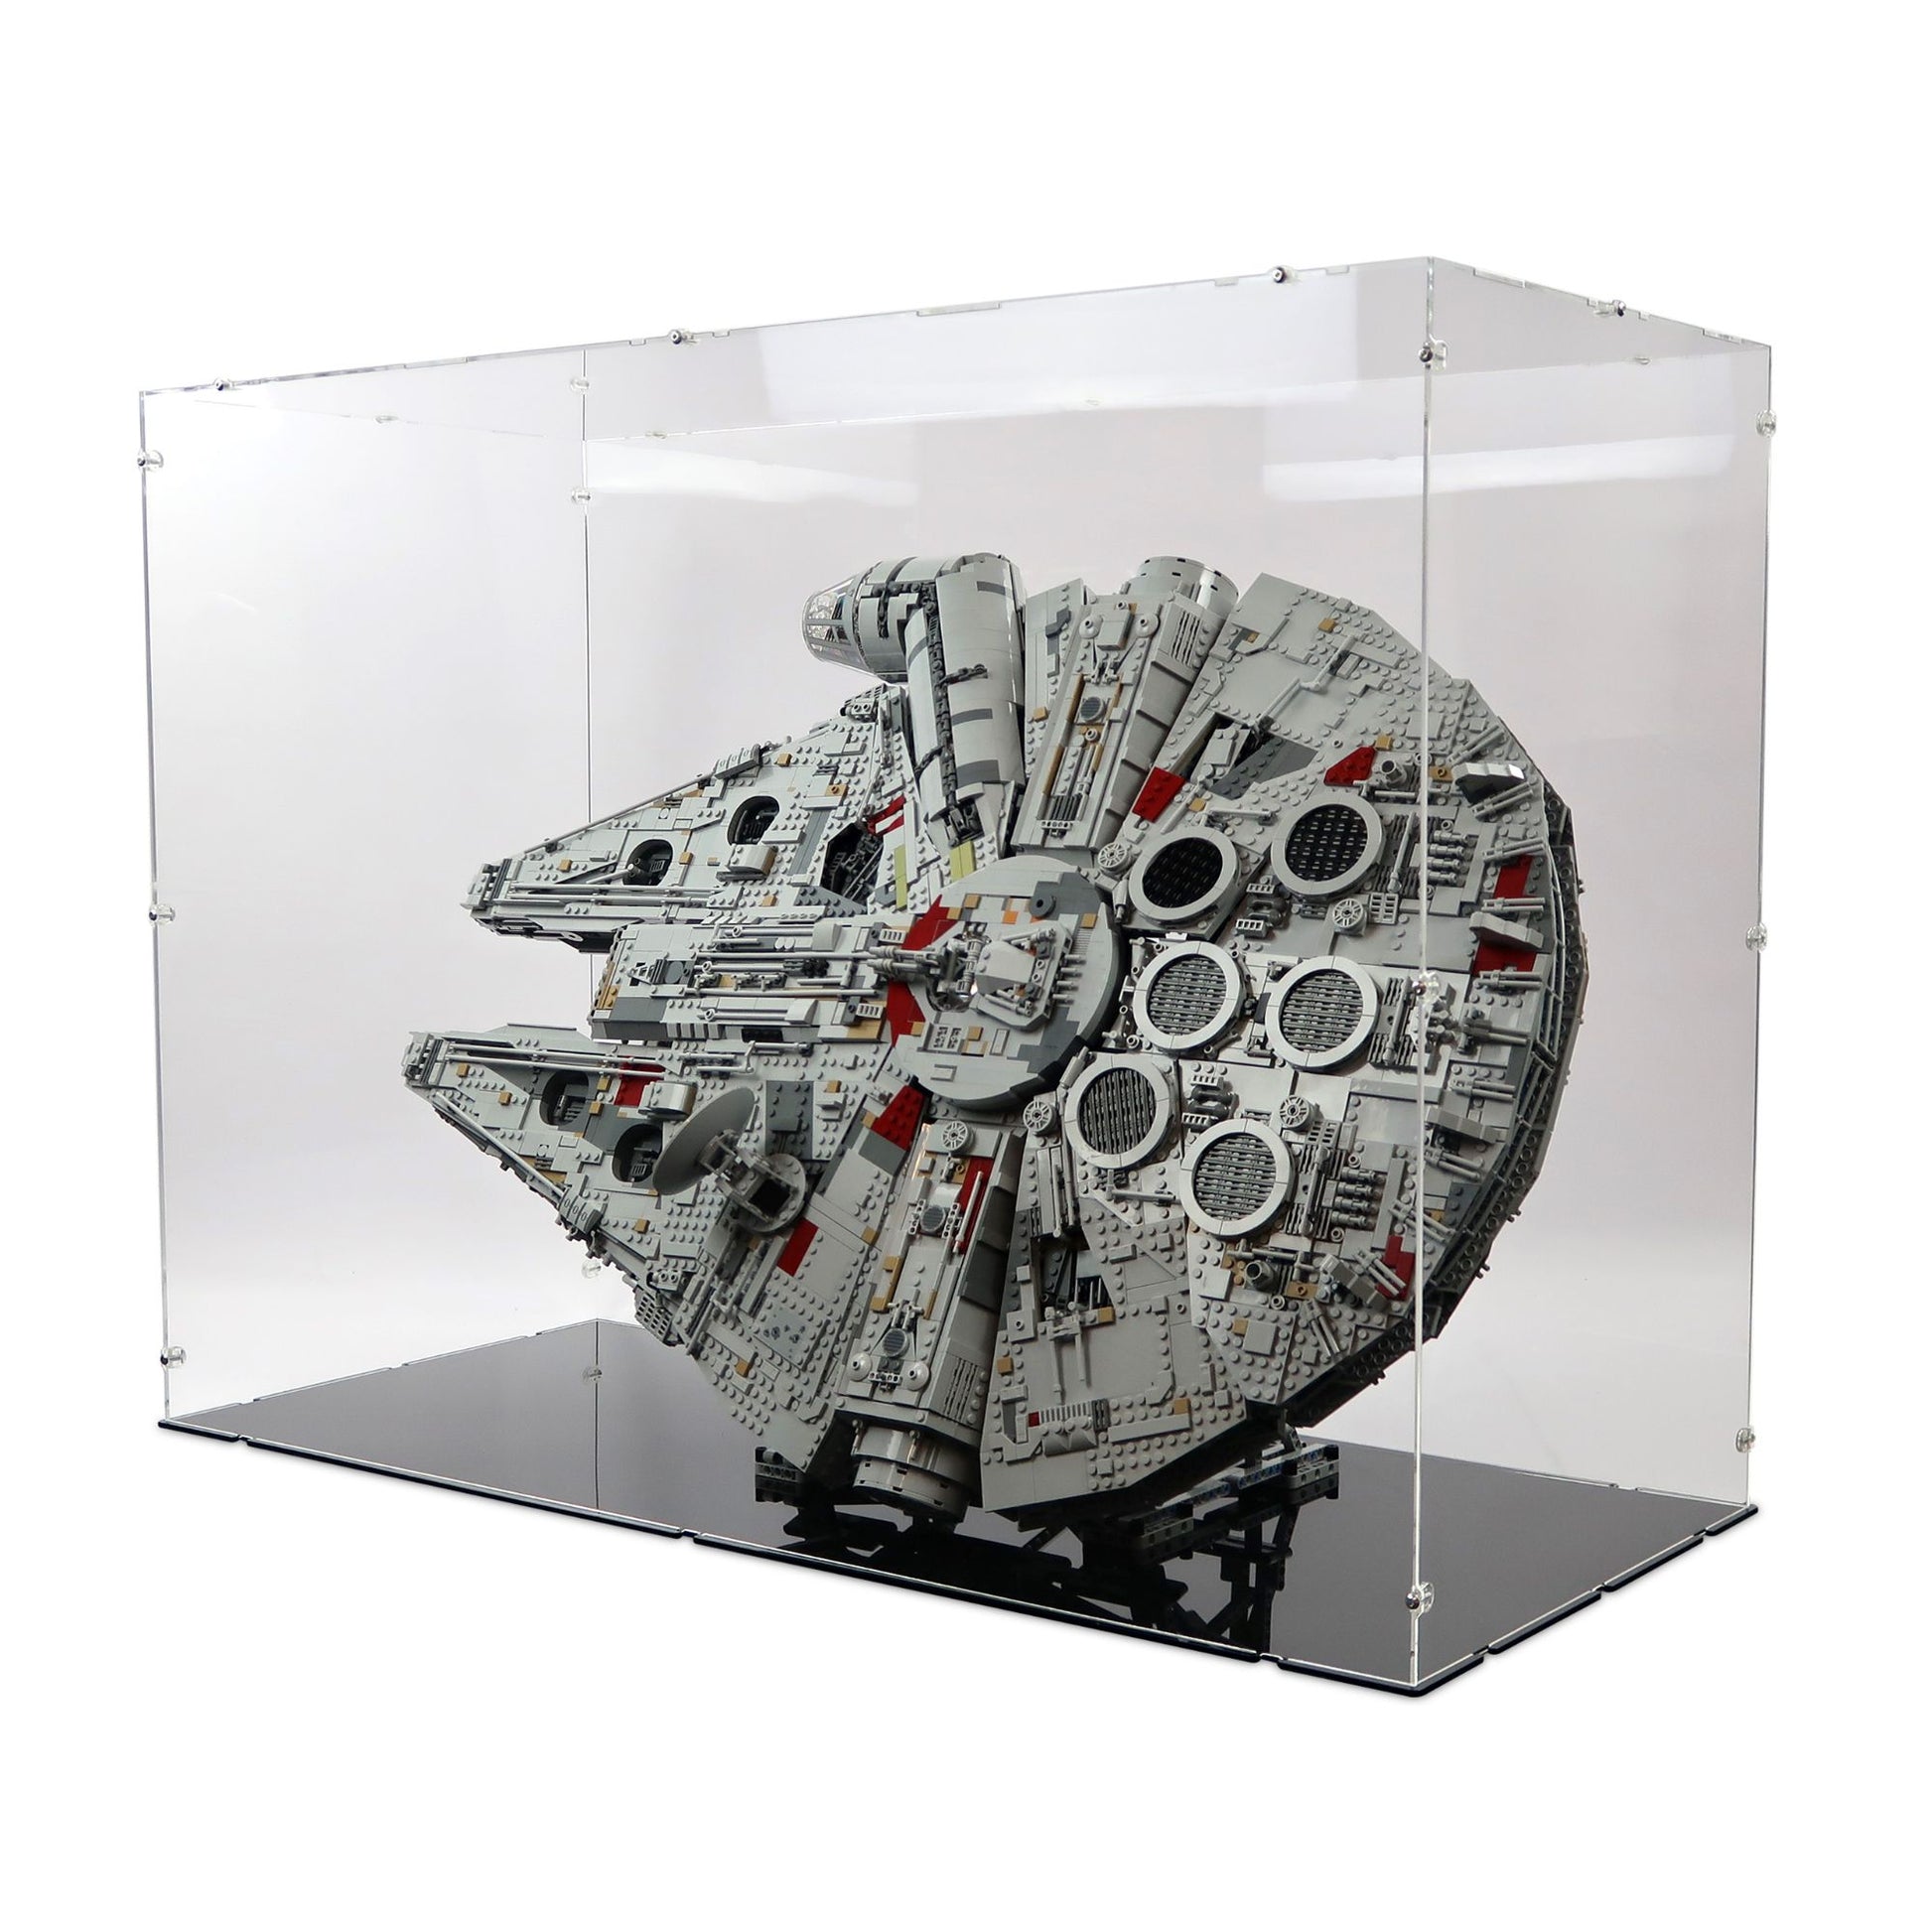 75192 UCS Millennium Falcon Display Case (For Vertical Stand